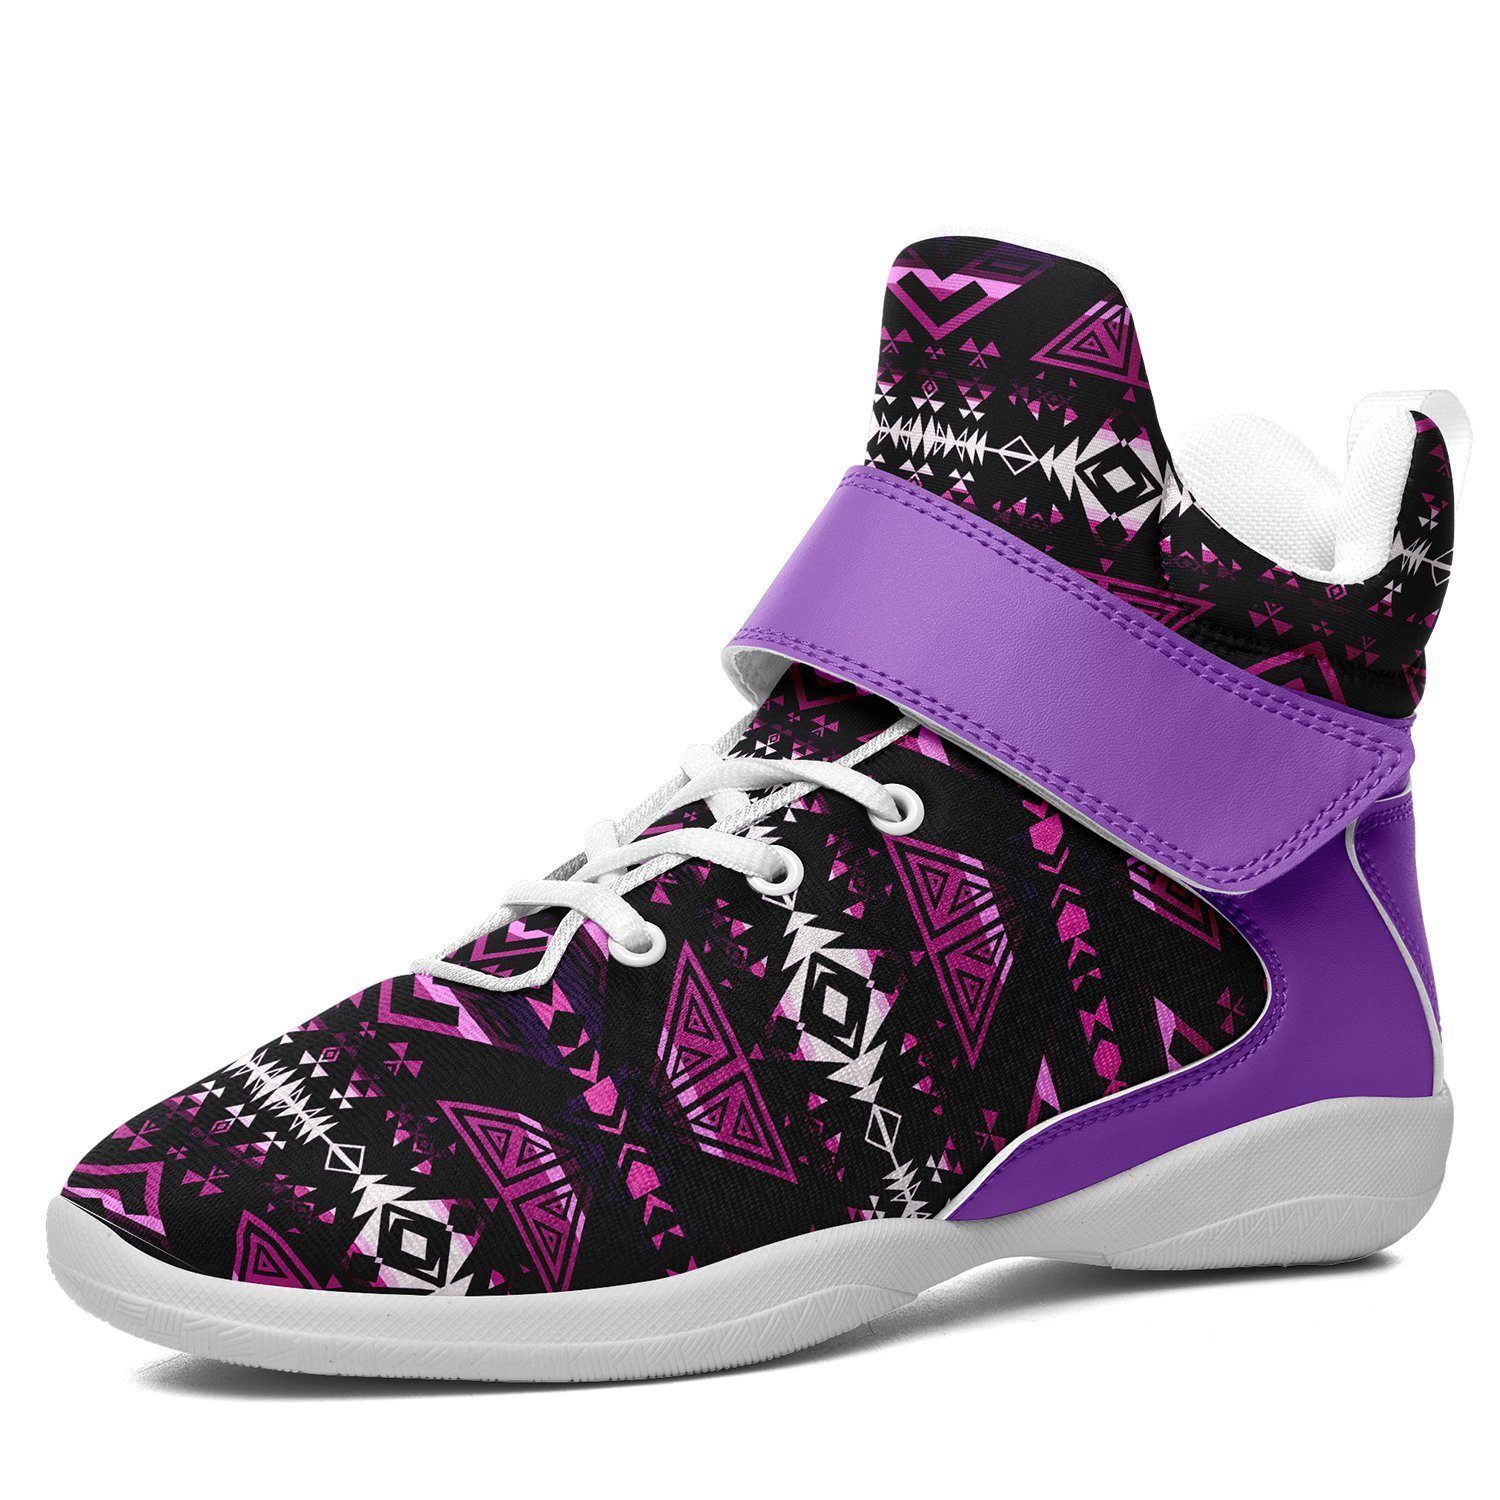 Upstream Expedition Moonlight Shadows Kid's Ipottaa Basketball / Sport High Top Shoes 49 Dzine US Child 12.5 / EUR 30 White Sole with Lavender Strap 